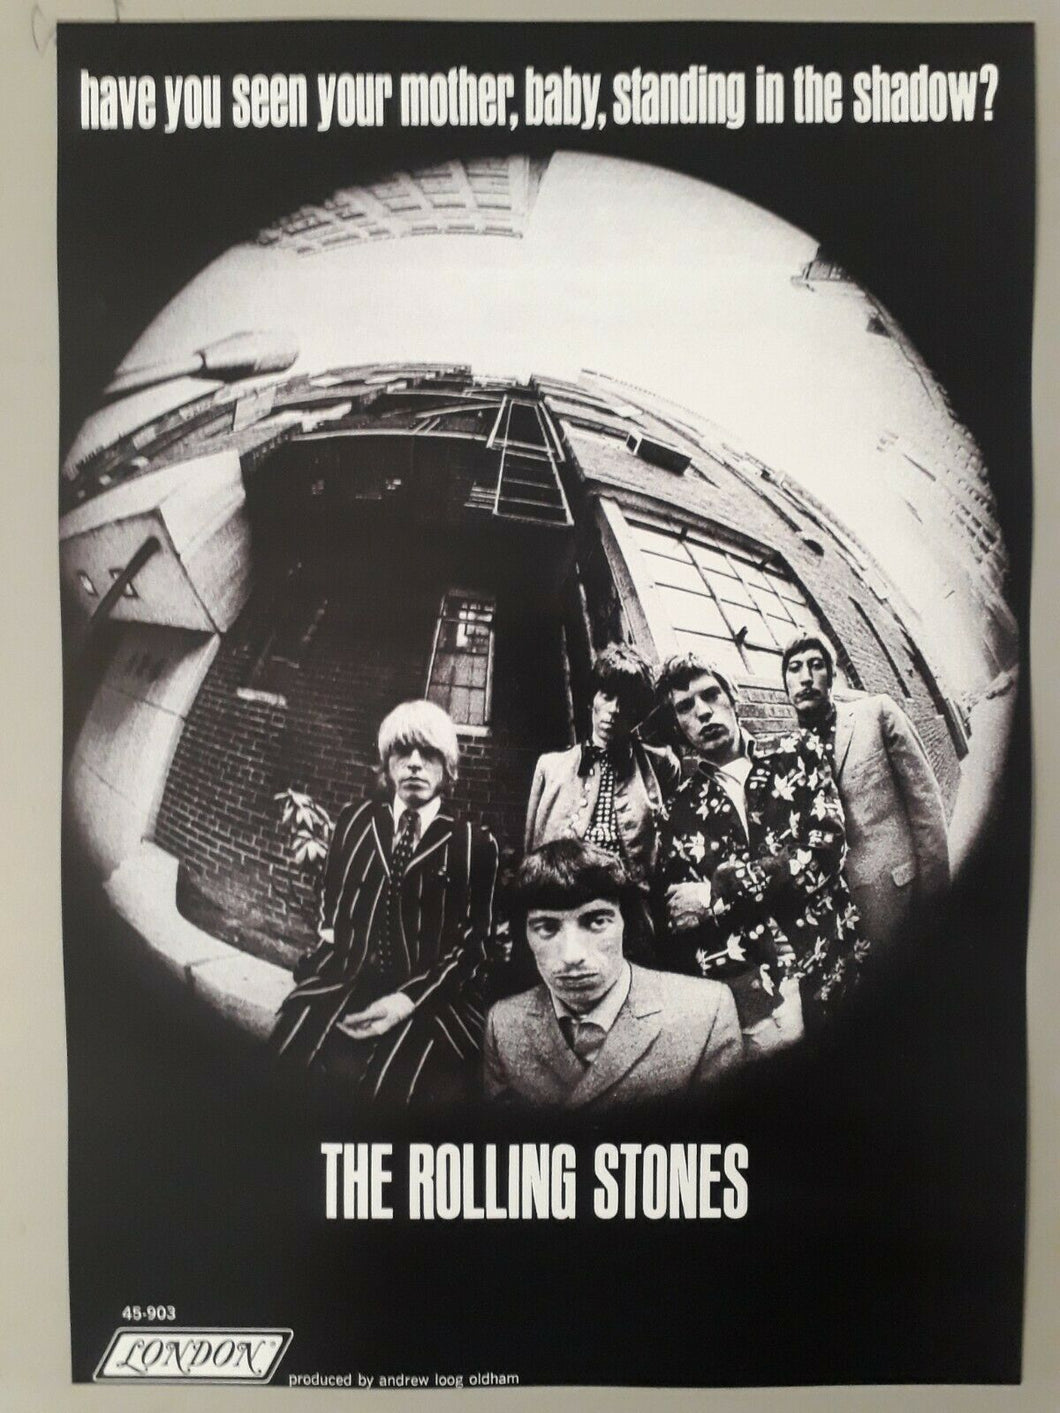 Rolling Stones promotional poster - Have you seen your mother baby 1966 reprint - Original Music and Movie Posters for sale from Bamalama - Online Poster Store UK London